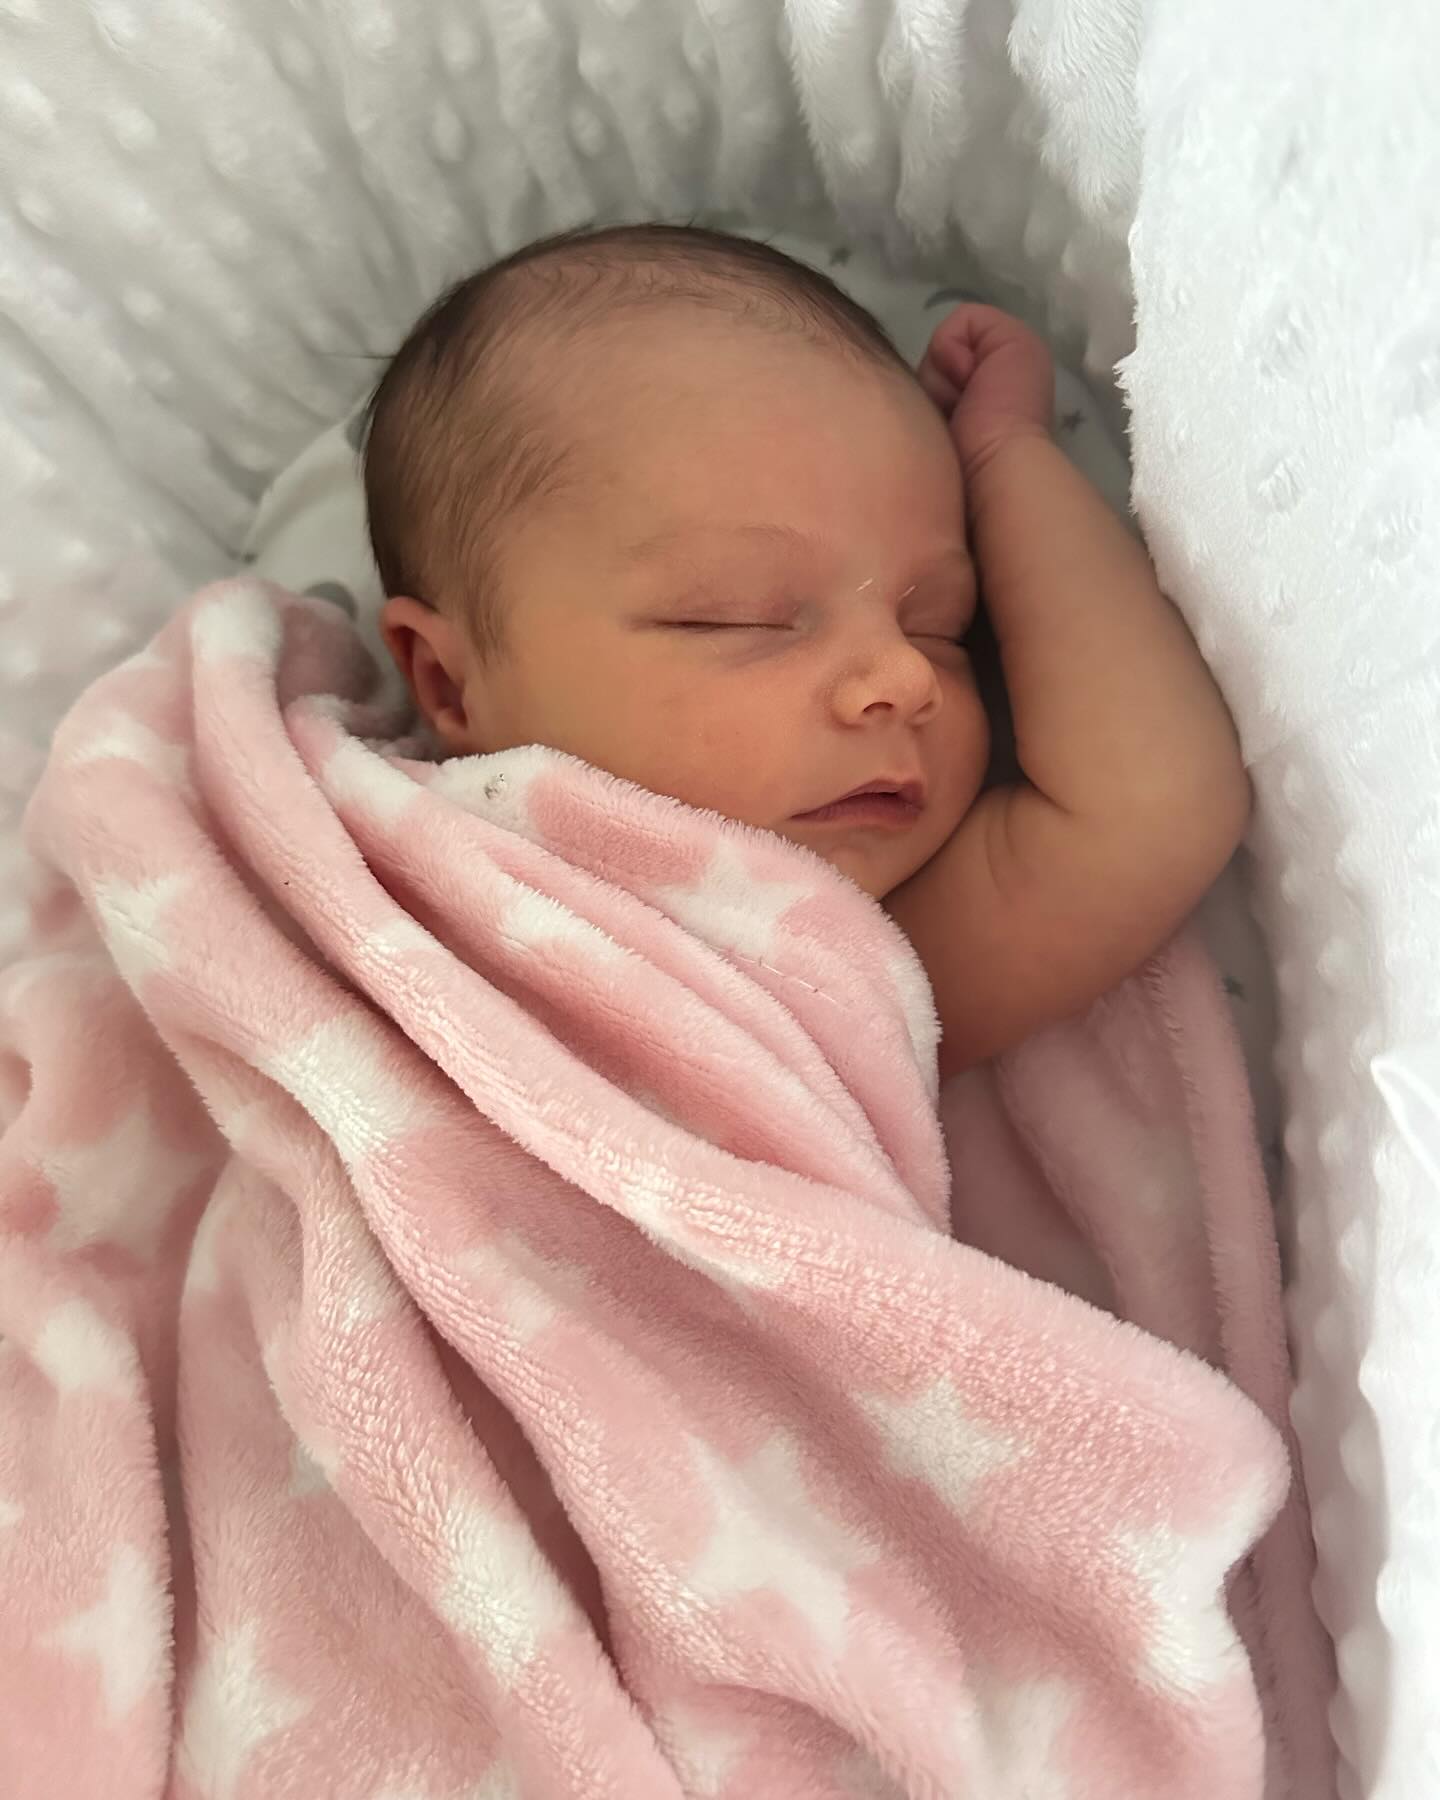 Hello world, my name is Aria-Jae 🌍 17/03/2024 ☘️ The day I birthed my Beautiful little British Irish Latino Baby Girl, myself in a water birth at home the way I wanted to ❤️ The day my life changed forever and world was complete.. 5 weeks ago, my world stood still, I’ve been lost in the moment with you ever since, you really are the most precious gift I’ve created 😭

I’ve found my biggest purpose and that is becoming your Mama. I promise to love and protect you forever.. 

My beautiful little miracle, I am so lucky & honoured to call you mine. Thank you for giving me the biggest purpose in my life and choosing me to become your Mammy!  I have never felt love like this, it’s so powerful, I just stare at you daily and cry at how grateful I am! Here’s to a future full of blessings, lessons and travelling the world together 🌍 ✈️